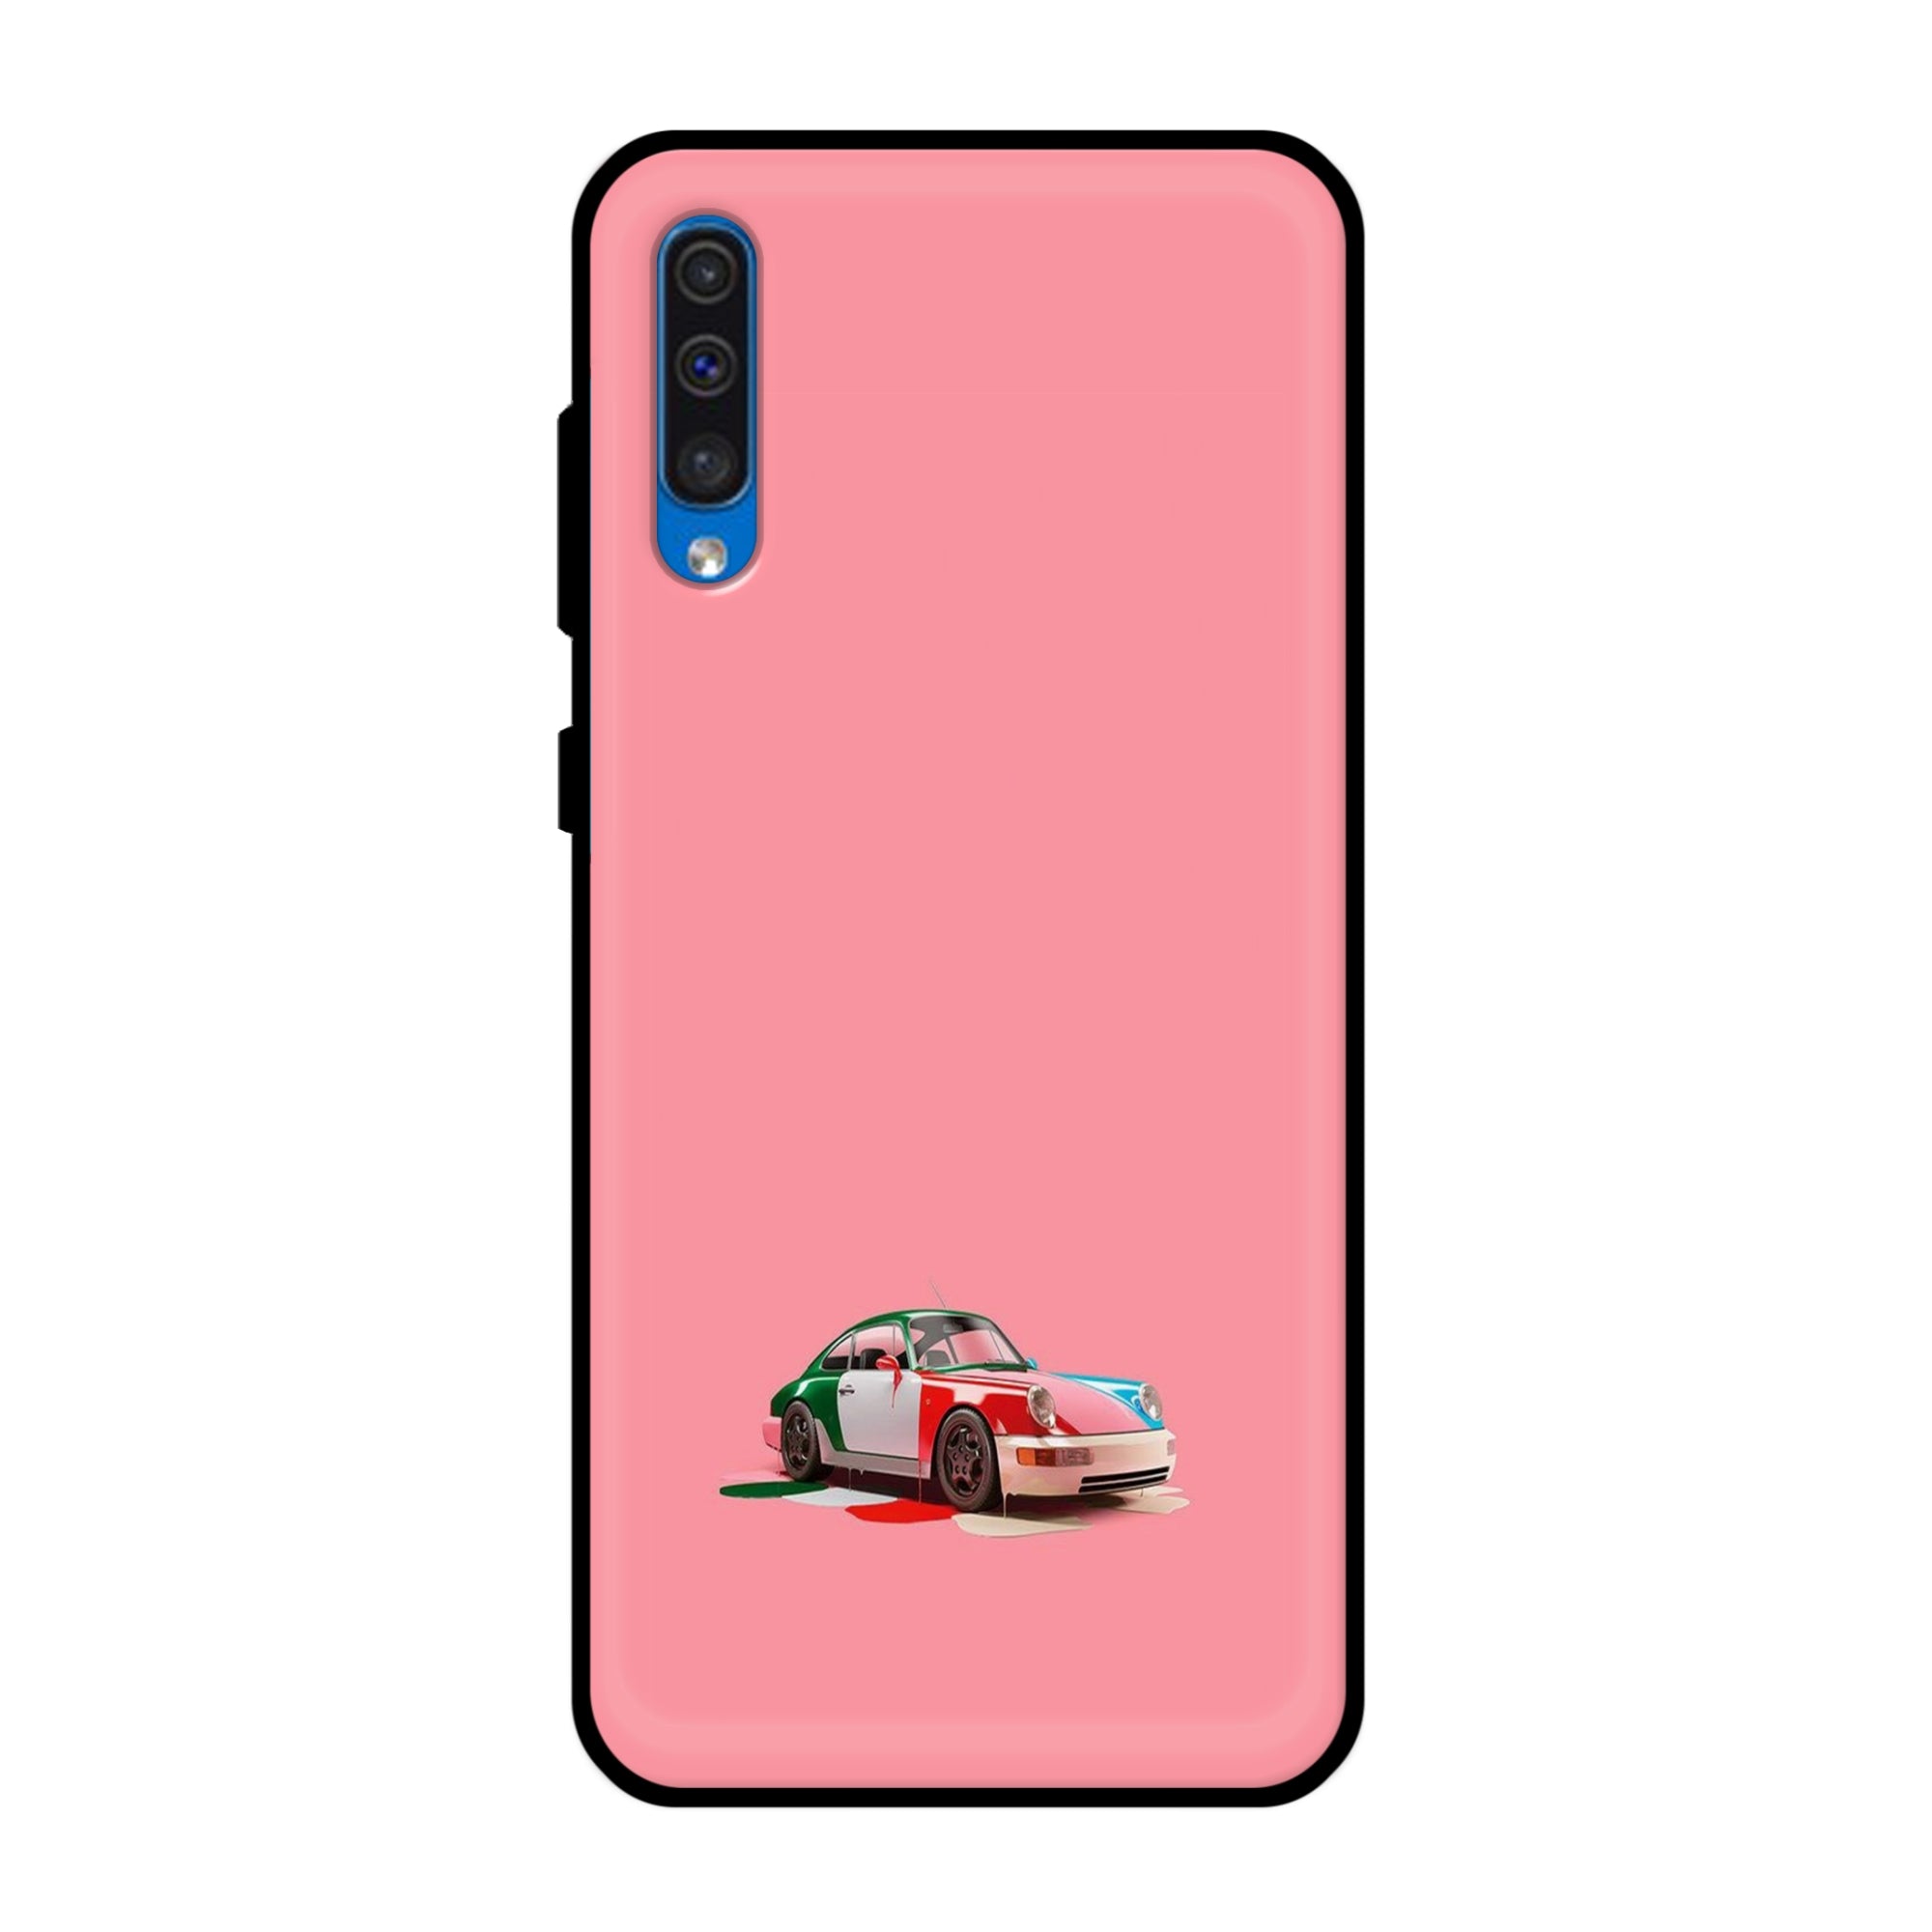 Buy Pink Porche Metal-Silicon Back Mobile Phone Case/Cover For Samsung Galaxy A50 / A50s / A30s Online